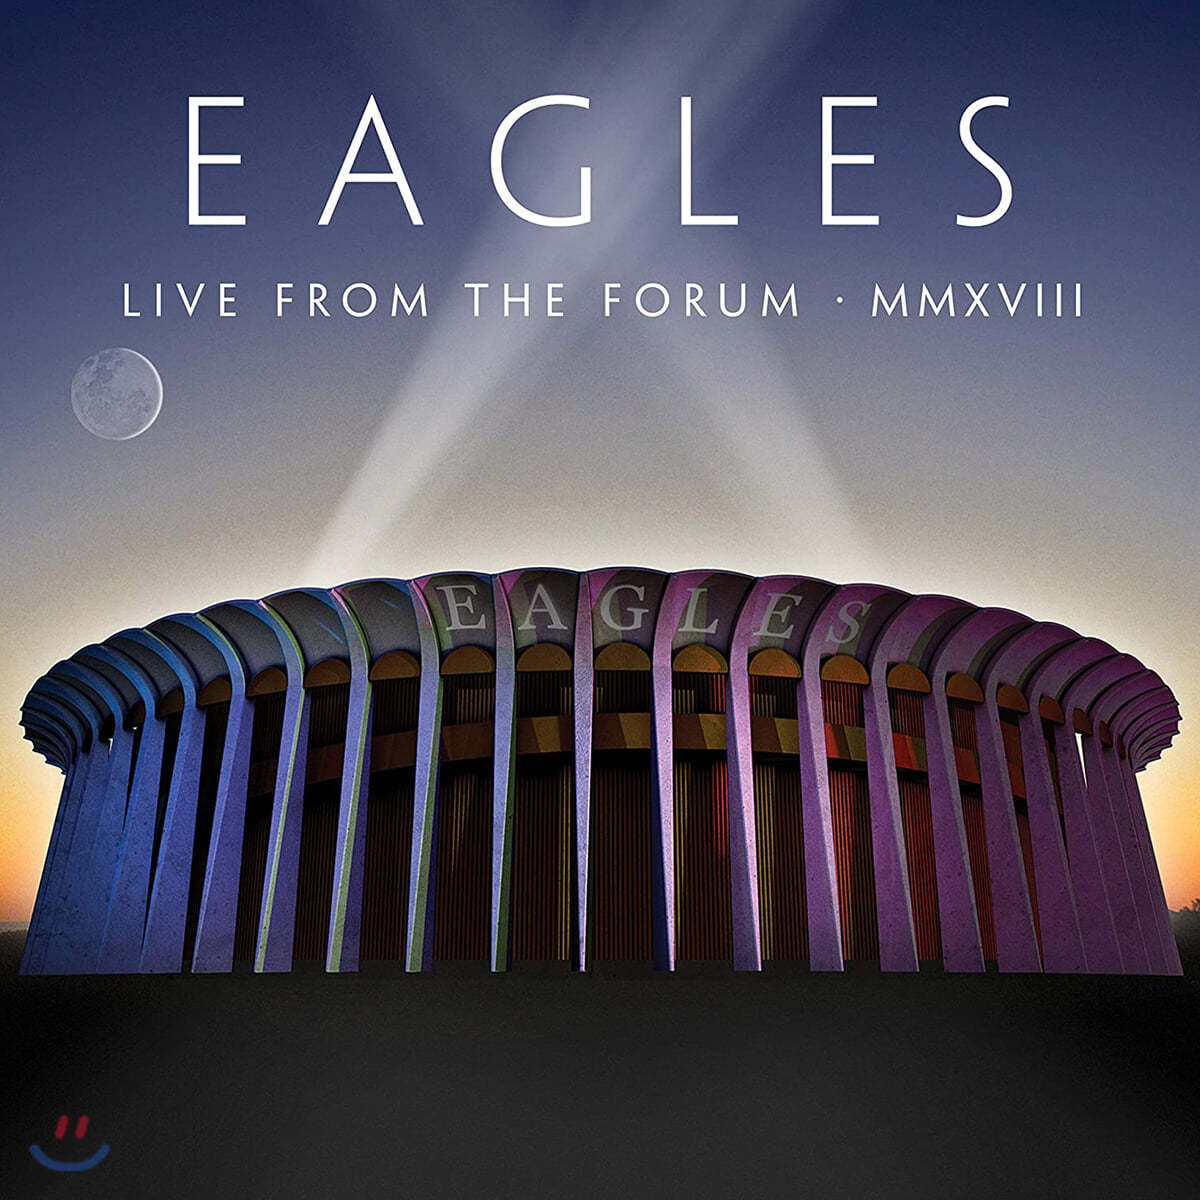 Eagles (이글스) - Live From The Forum MMXVIII [2CD+Blu-ray]